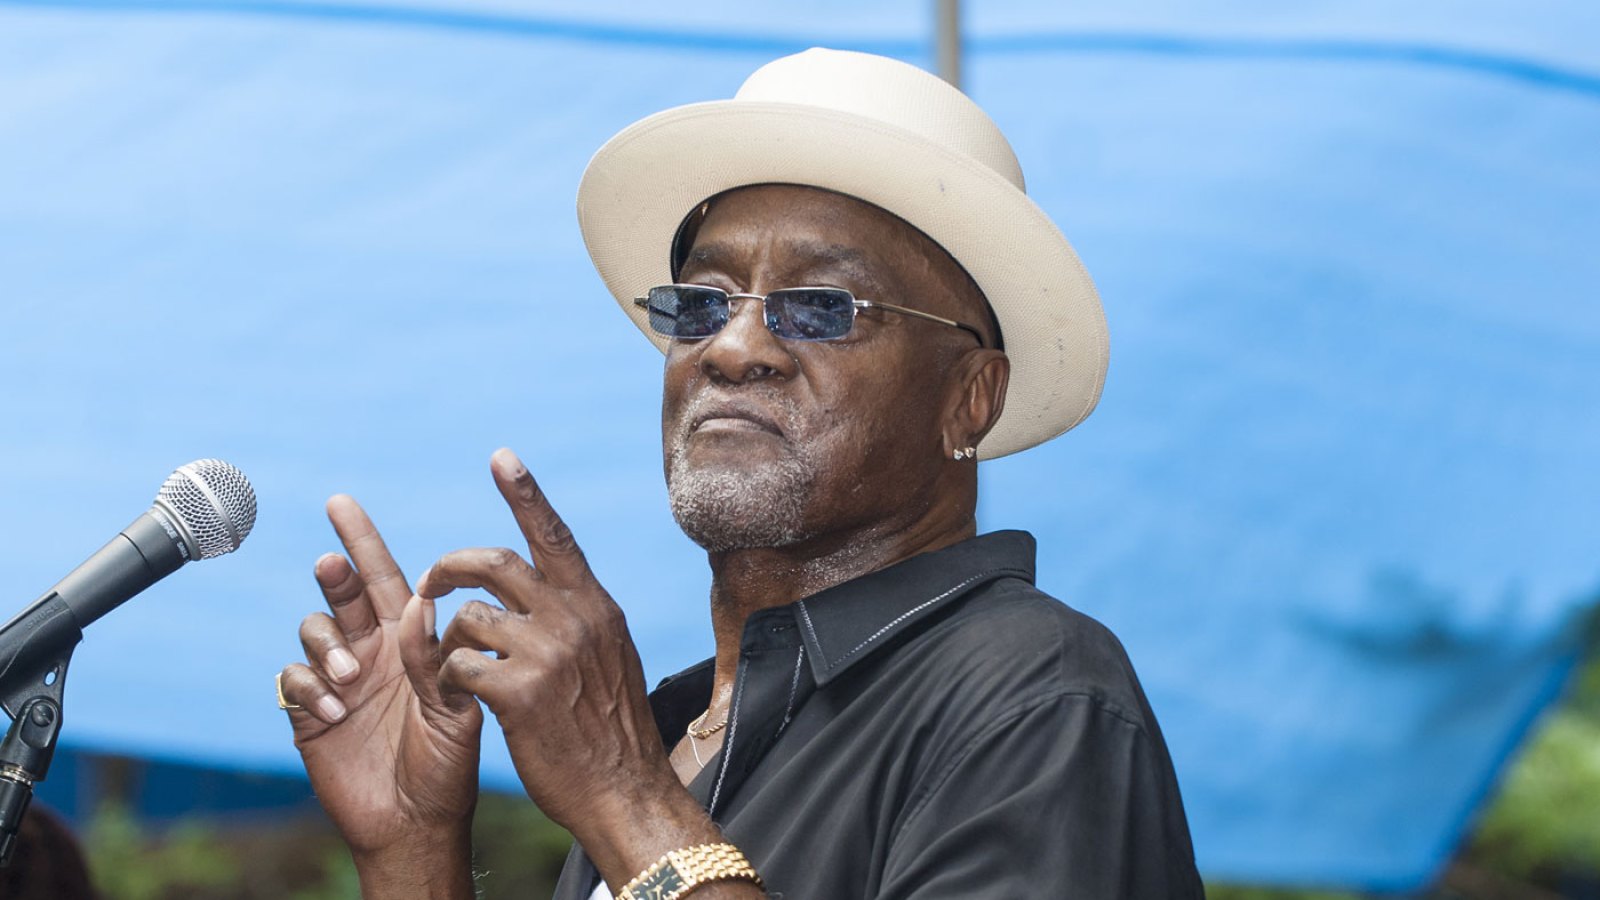 Billy Paul has died at the age of 80